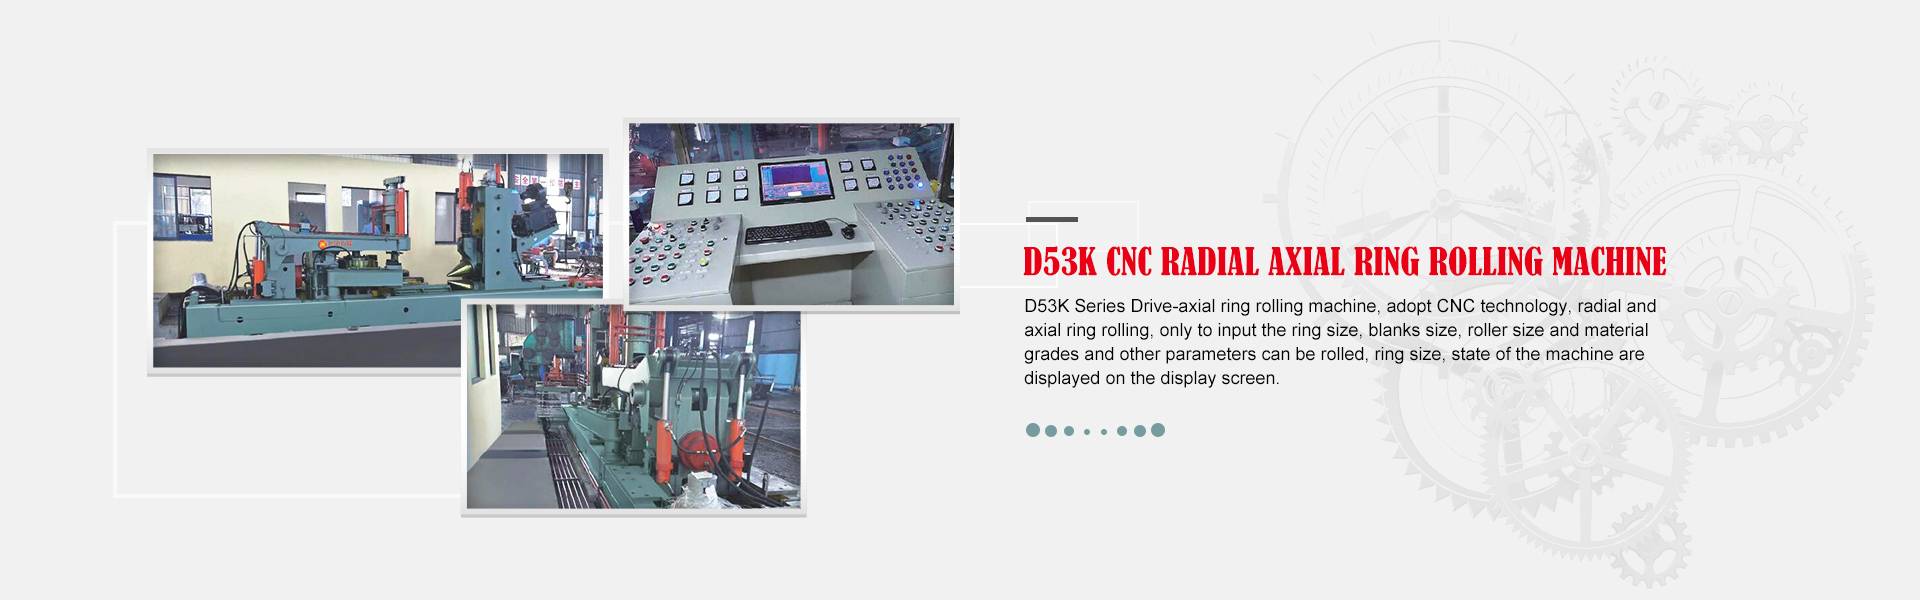 D53K CNC RADIAL AXIAL RING ROLLING MACHINE